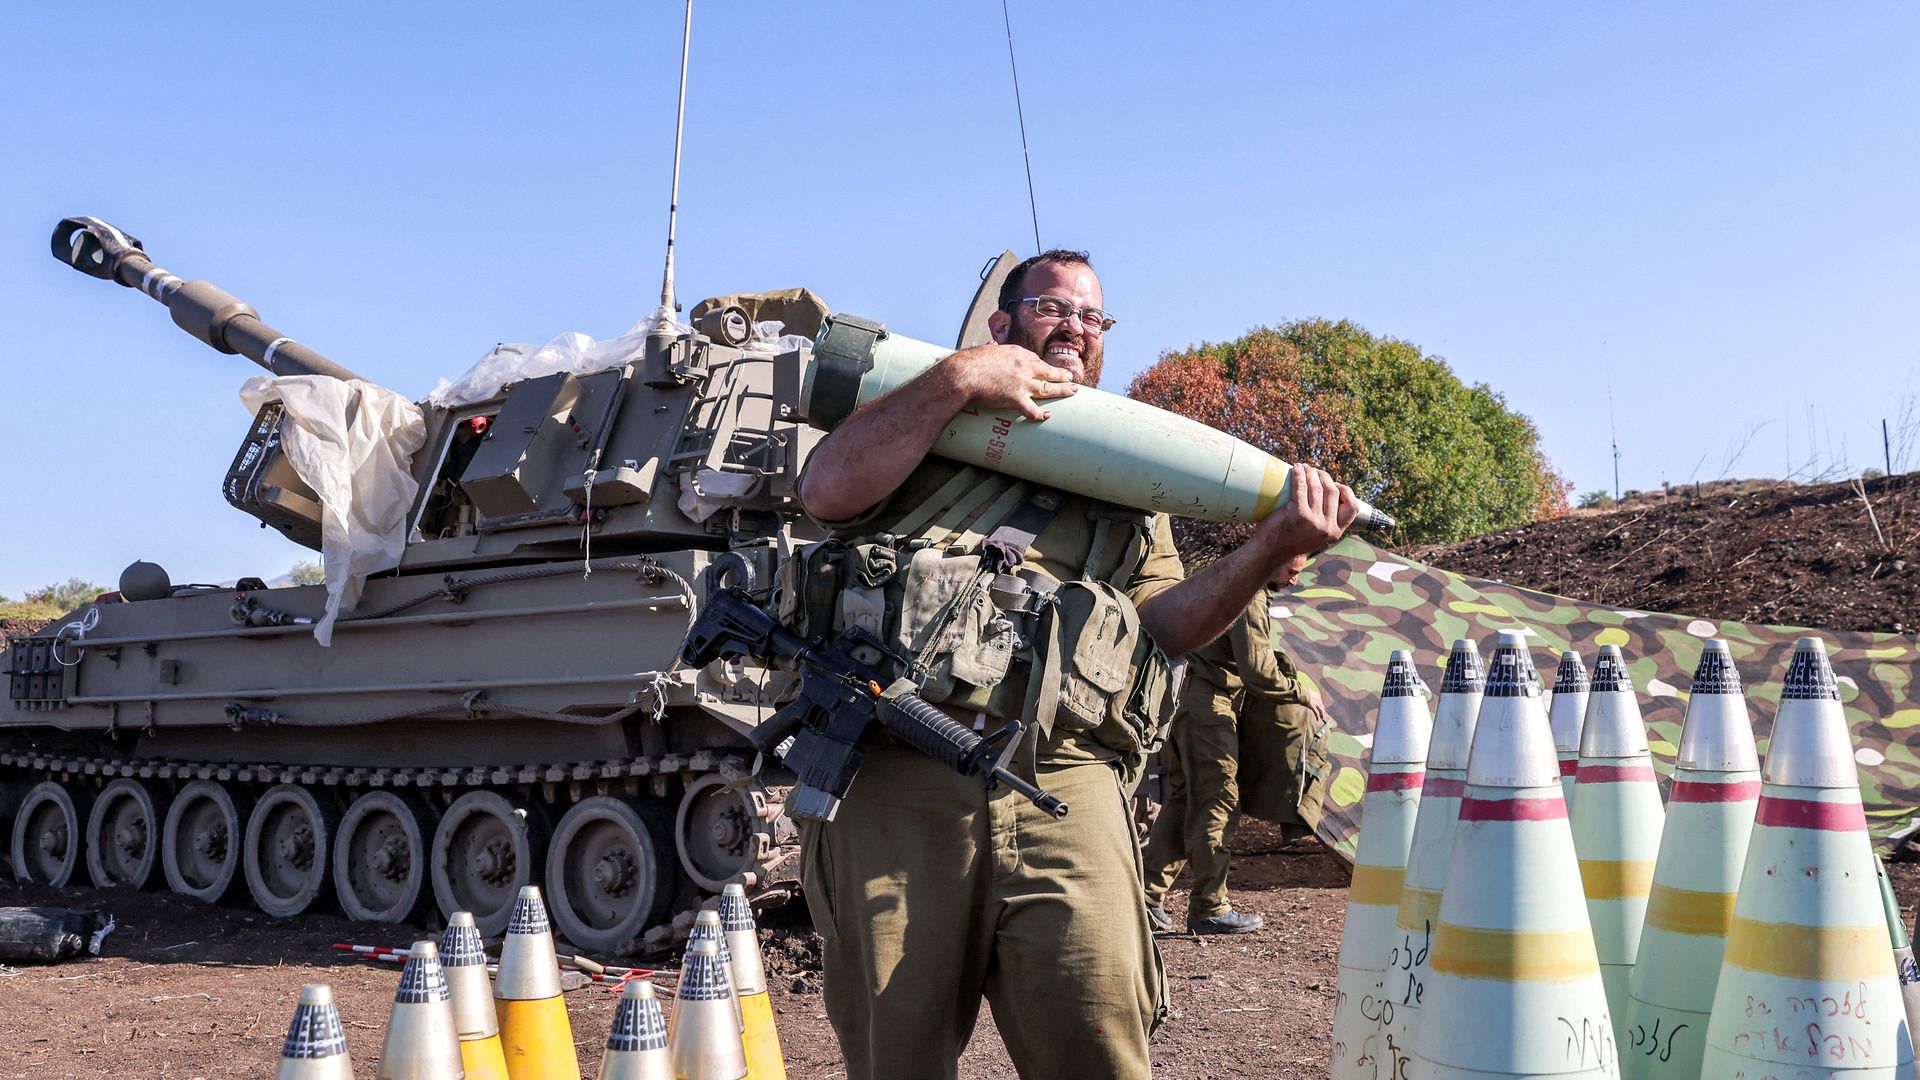 Scoop: U.S. to send Israel artillery shells initially destined for